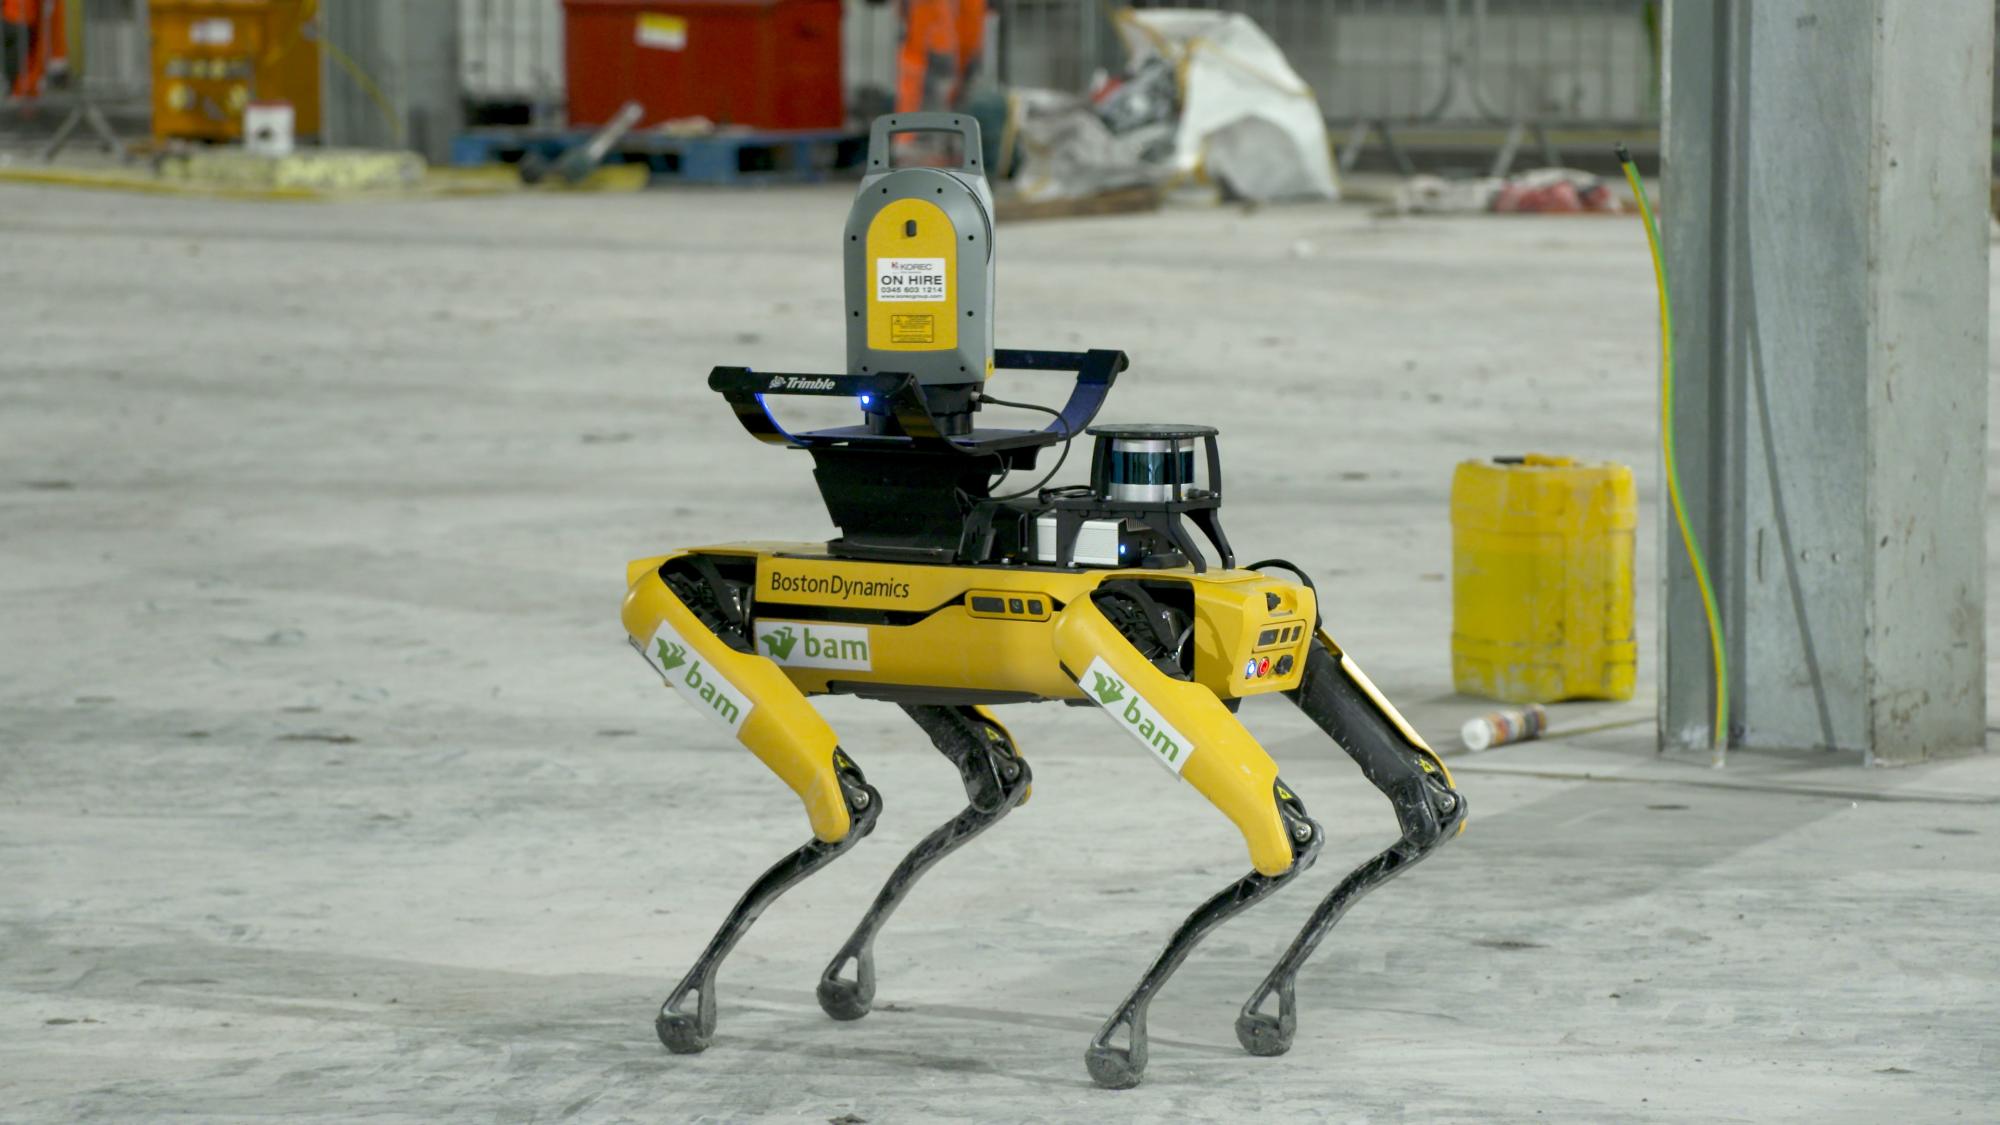 Robot dog helps Bam on remote Shetland site [- with video] thumbnail